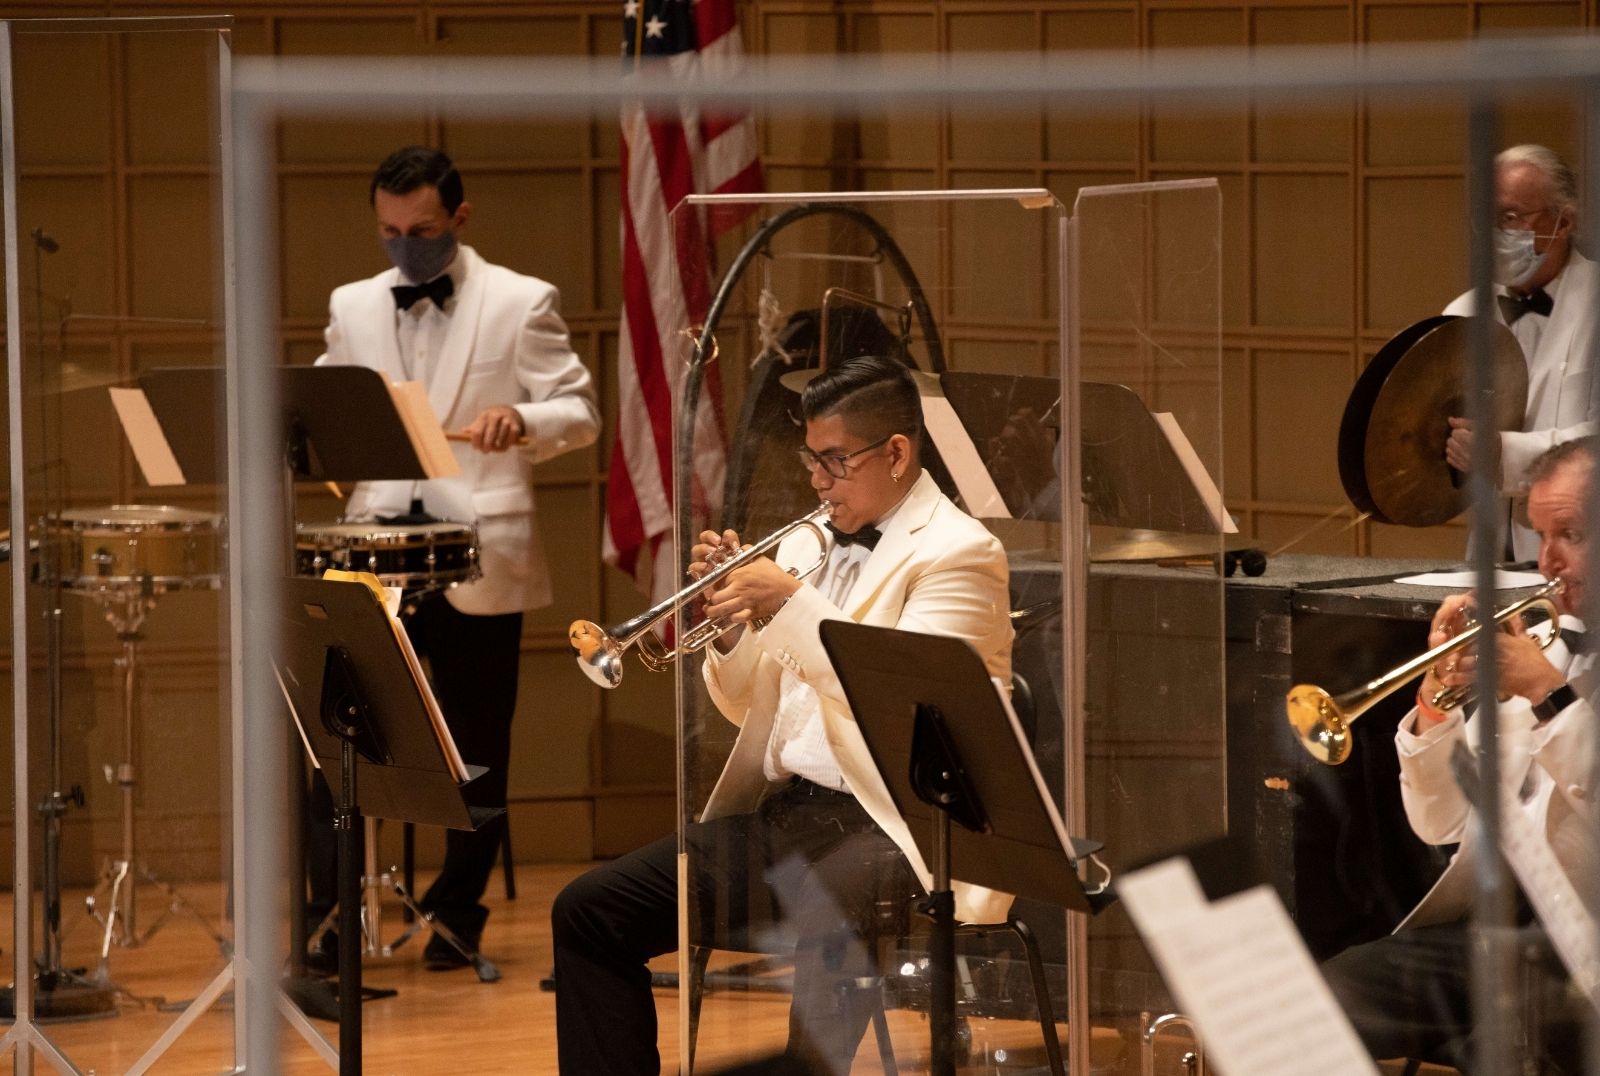 DSO Musicians performing during COVID-19 Pandemic